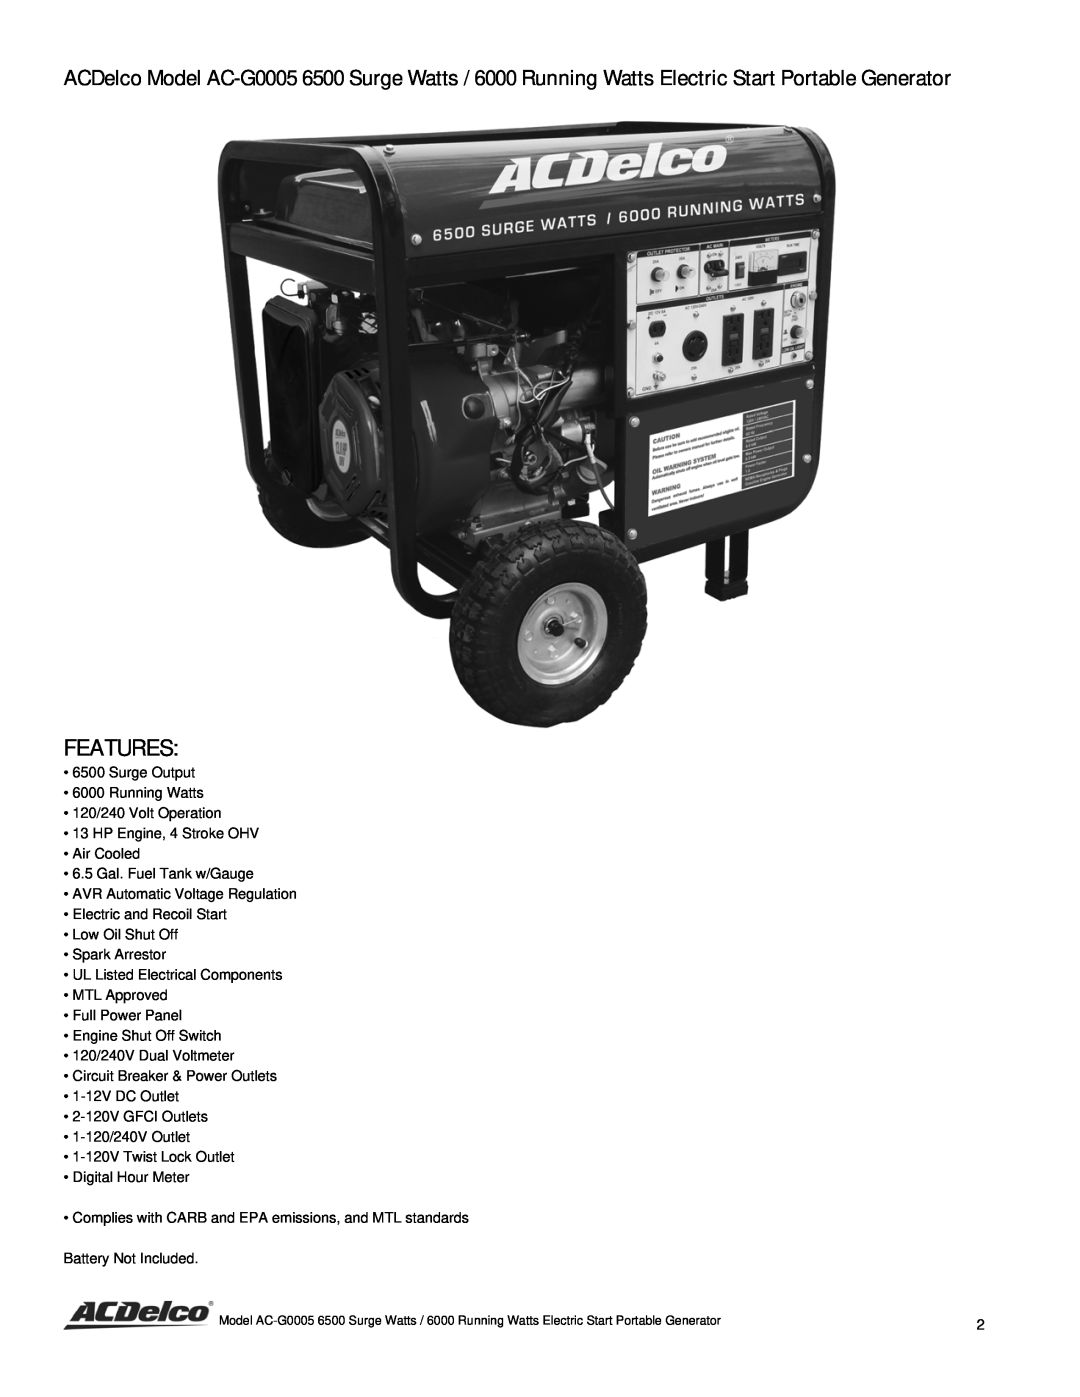 ACDelco AC-G0005 instruction manual Features 